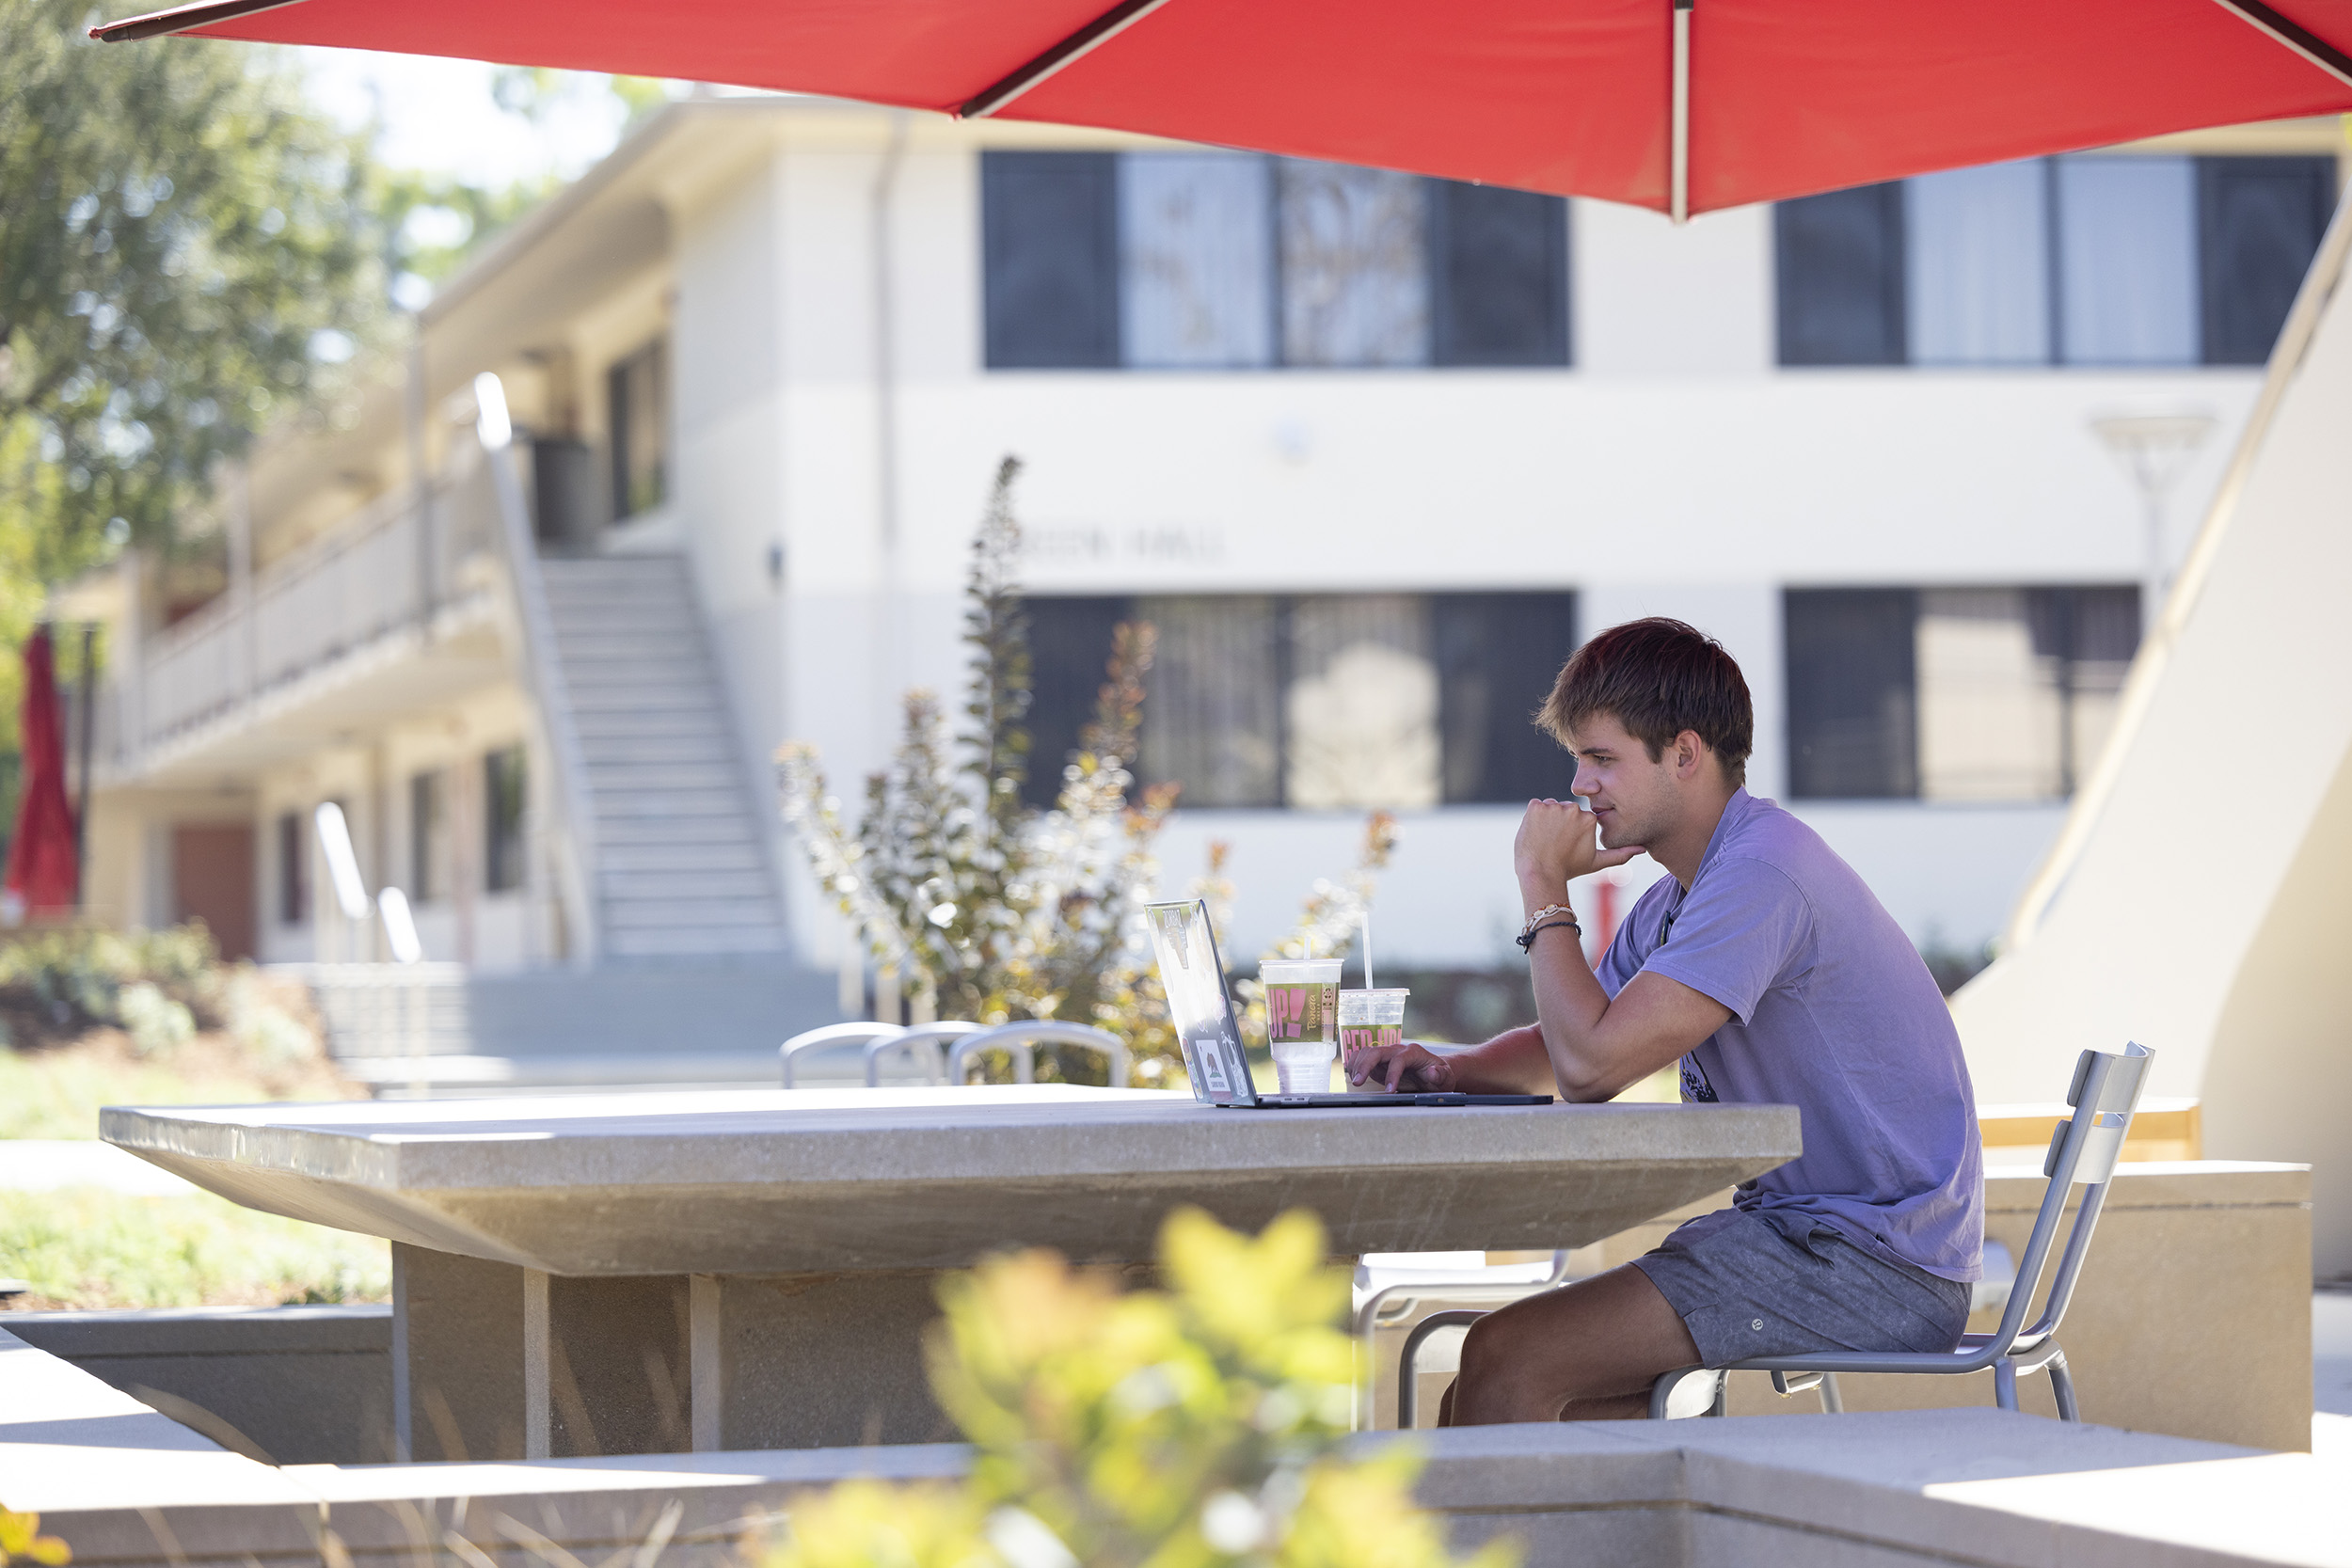 A student utilizes one of the shaded outdoor tables newly installed on campus.